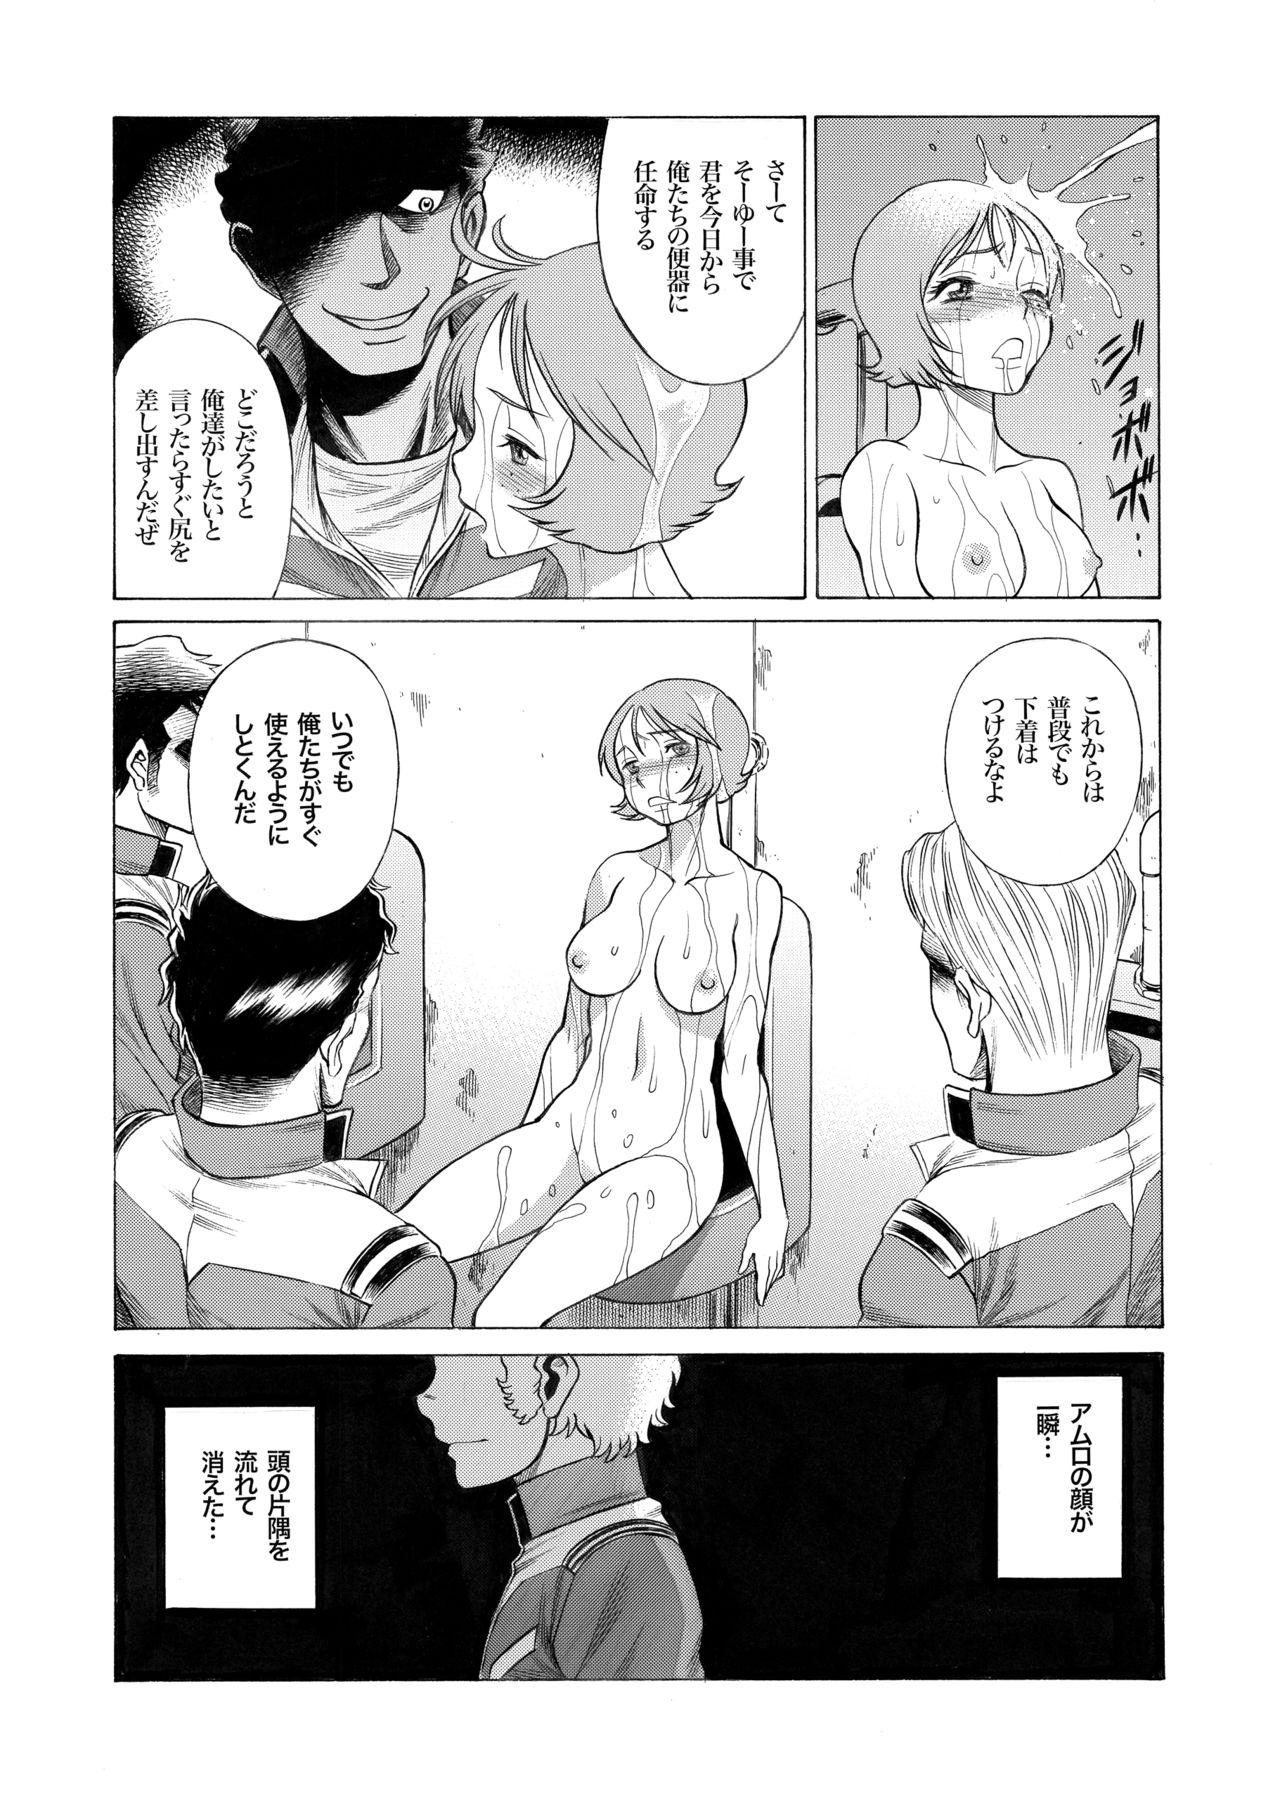 Fellatio Reijoh - Mobile suit gundam Perfect Butt - Page 7